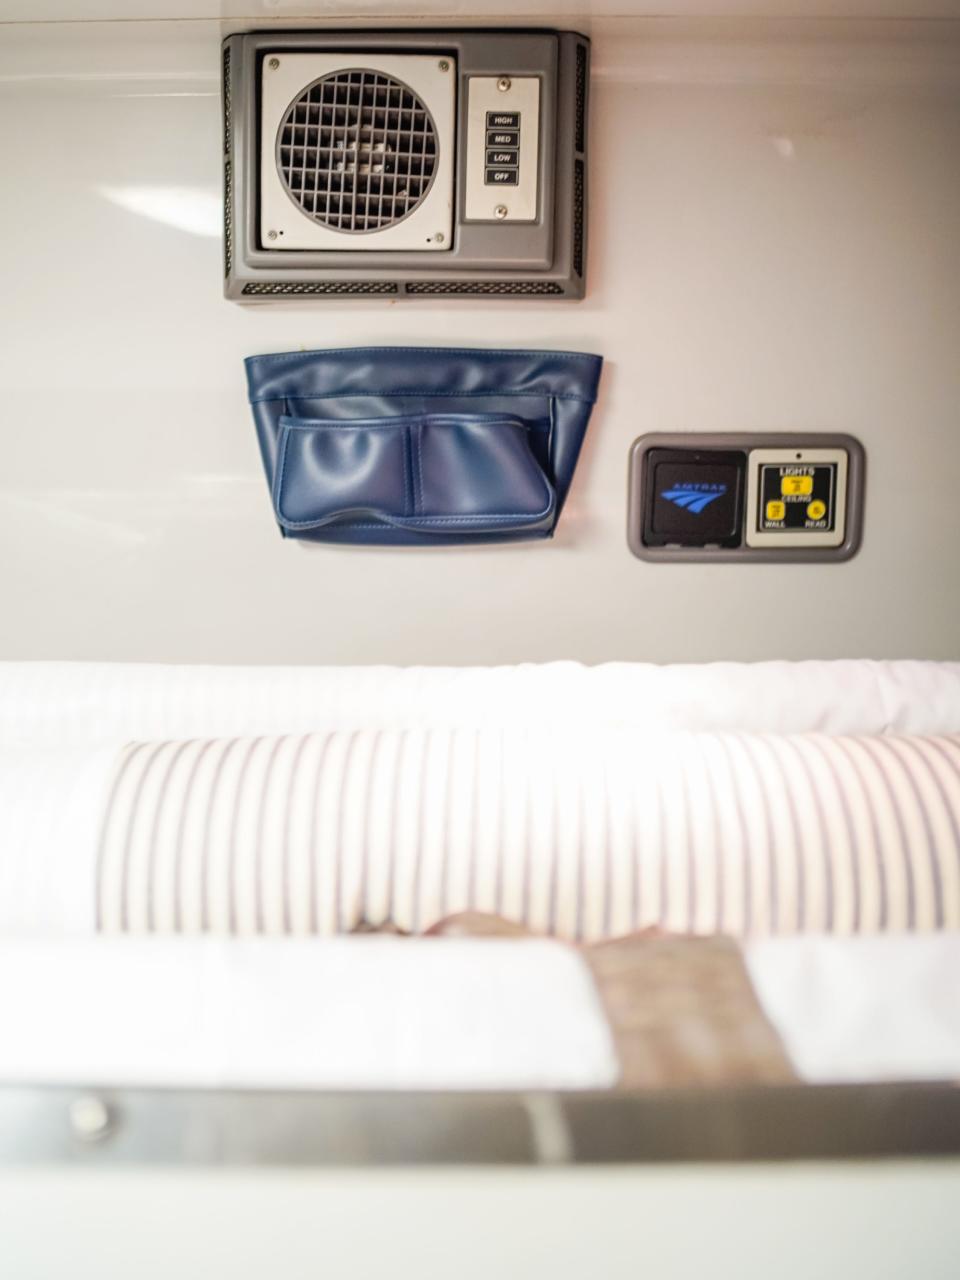 Air conditioning, a pocket for personal items, and light adjustment controls on the wall of the bedroom